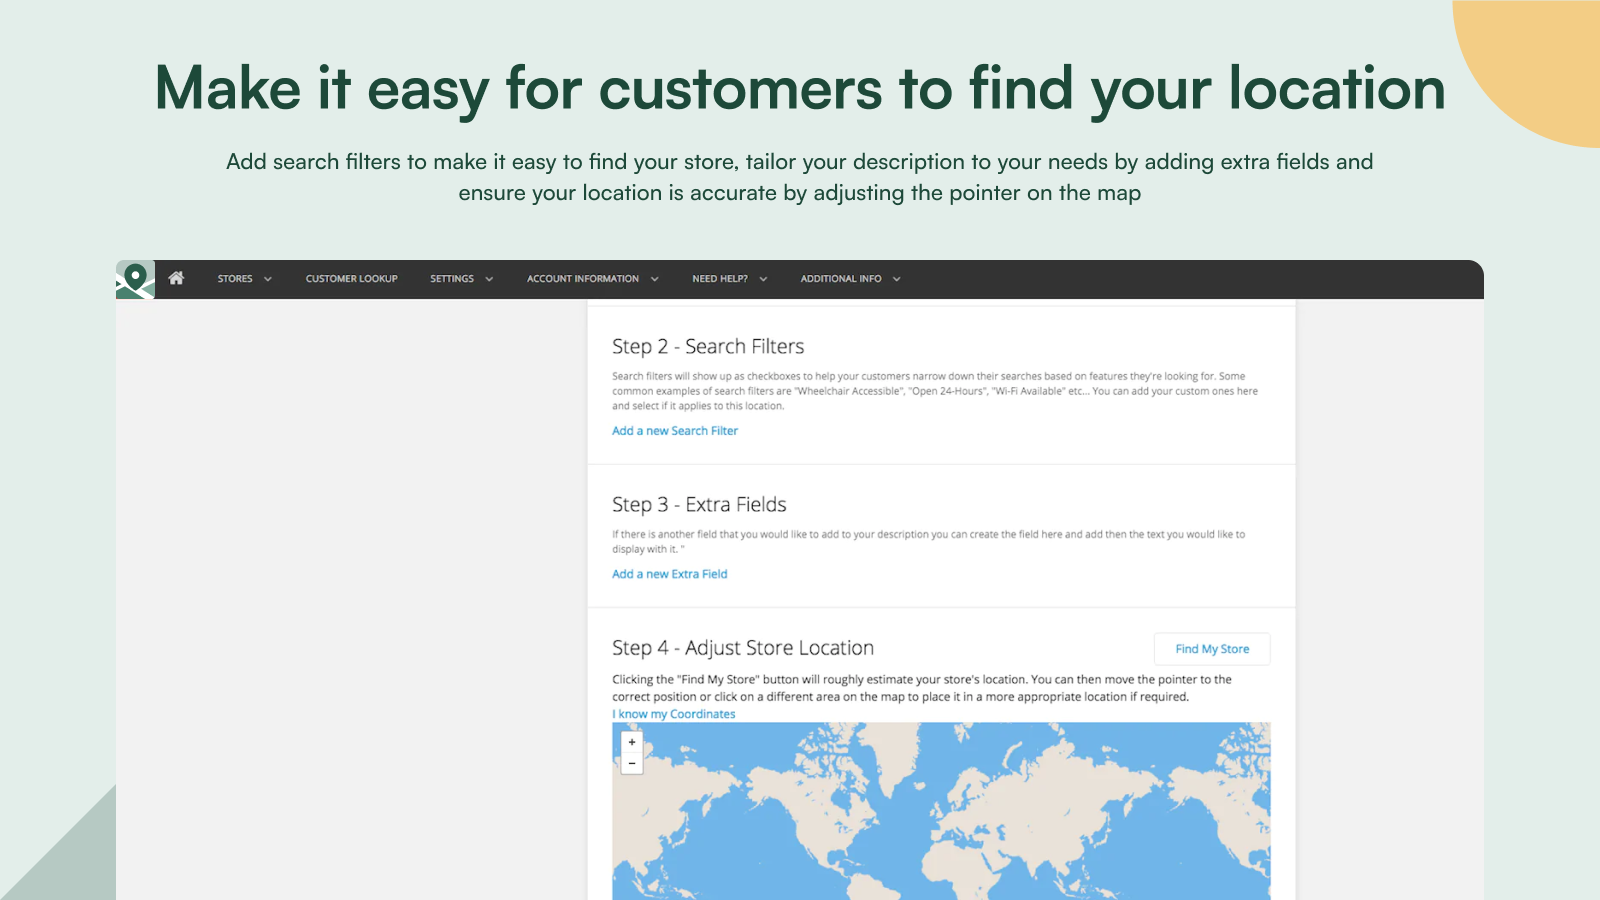 Make it easy for your customers to find your location